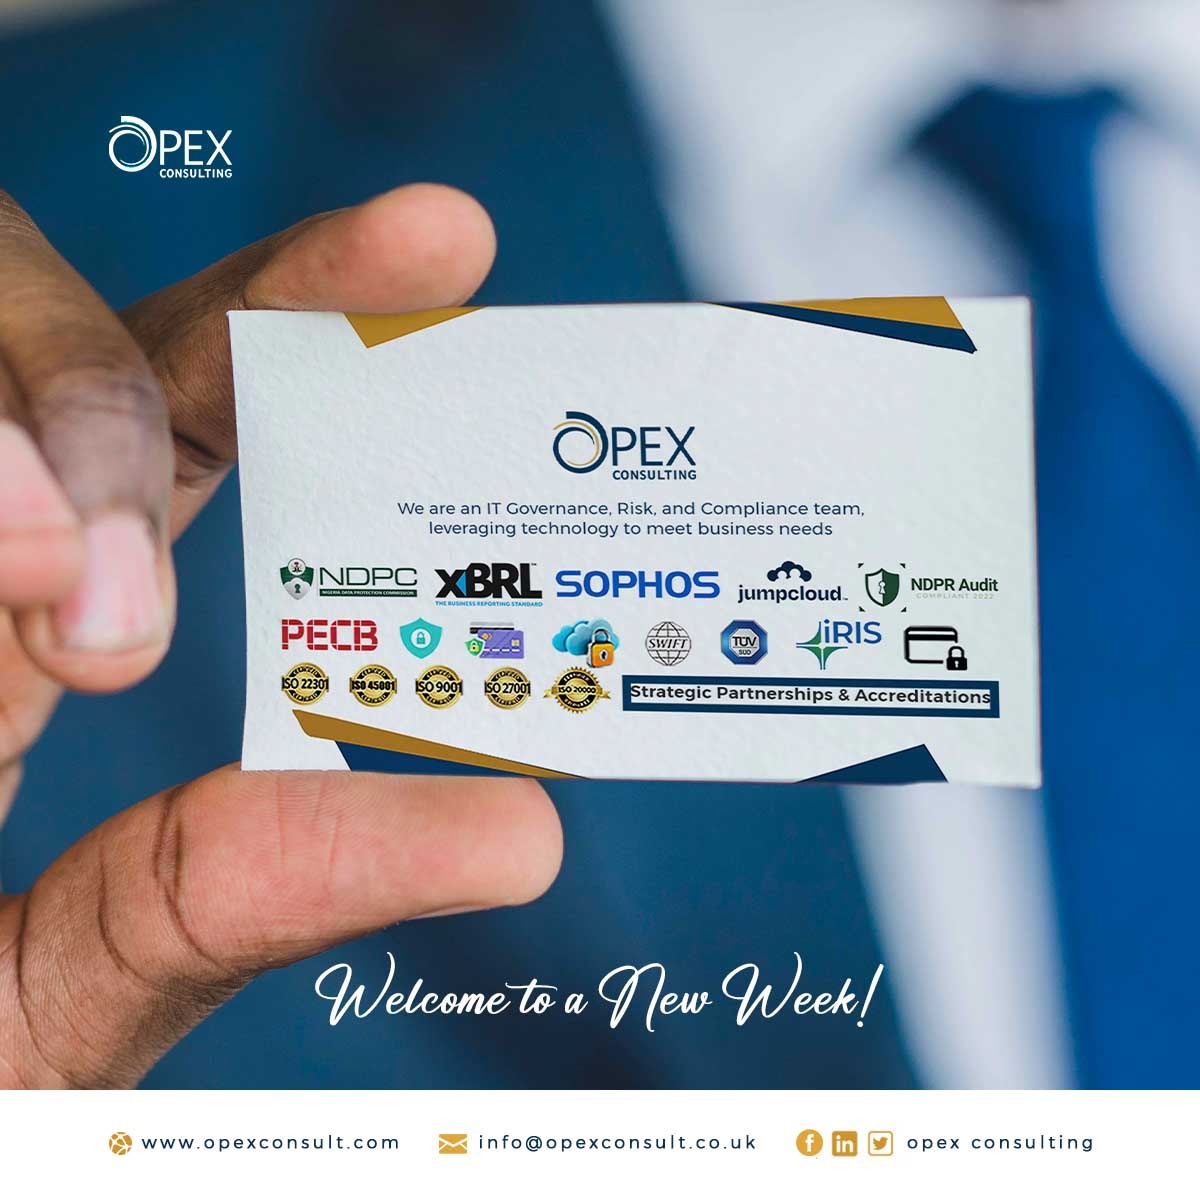 Welcome to a New Week!

#NewWeek #Monday #ISOStandards #Goals #TechnologySolution #Compliance #Strength #Peace #DigitalAcademy #Thrive #Cybersecurity #Management #Banks #CBN #leadership #Tech #sales #ISO